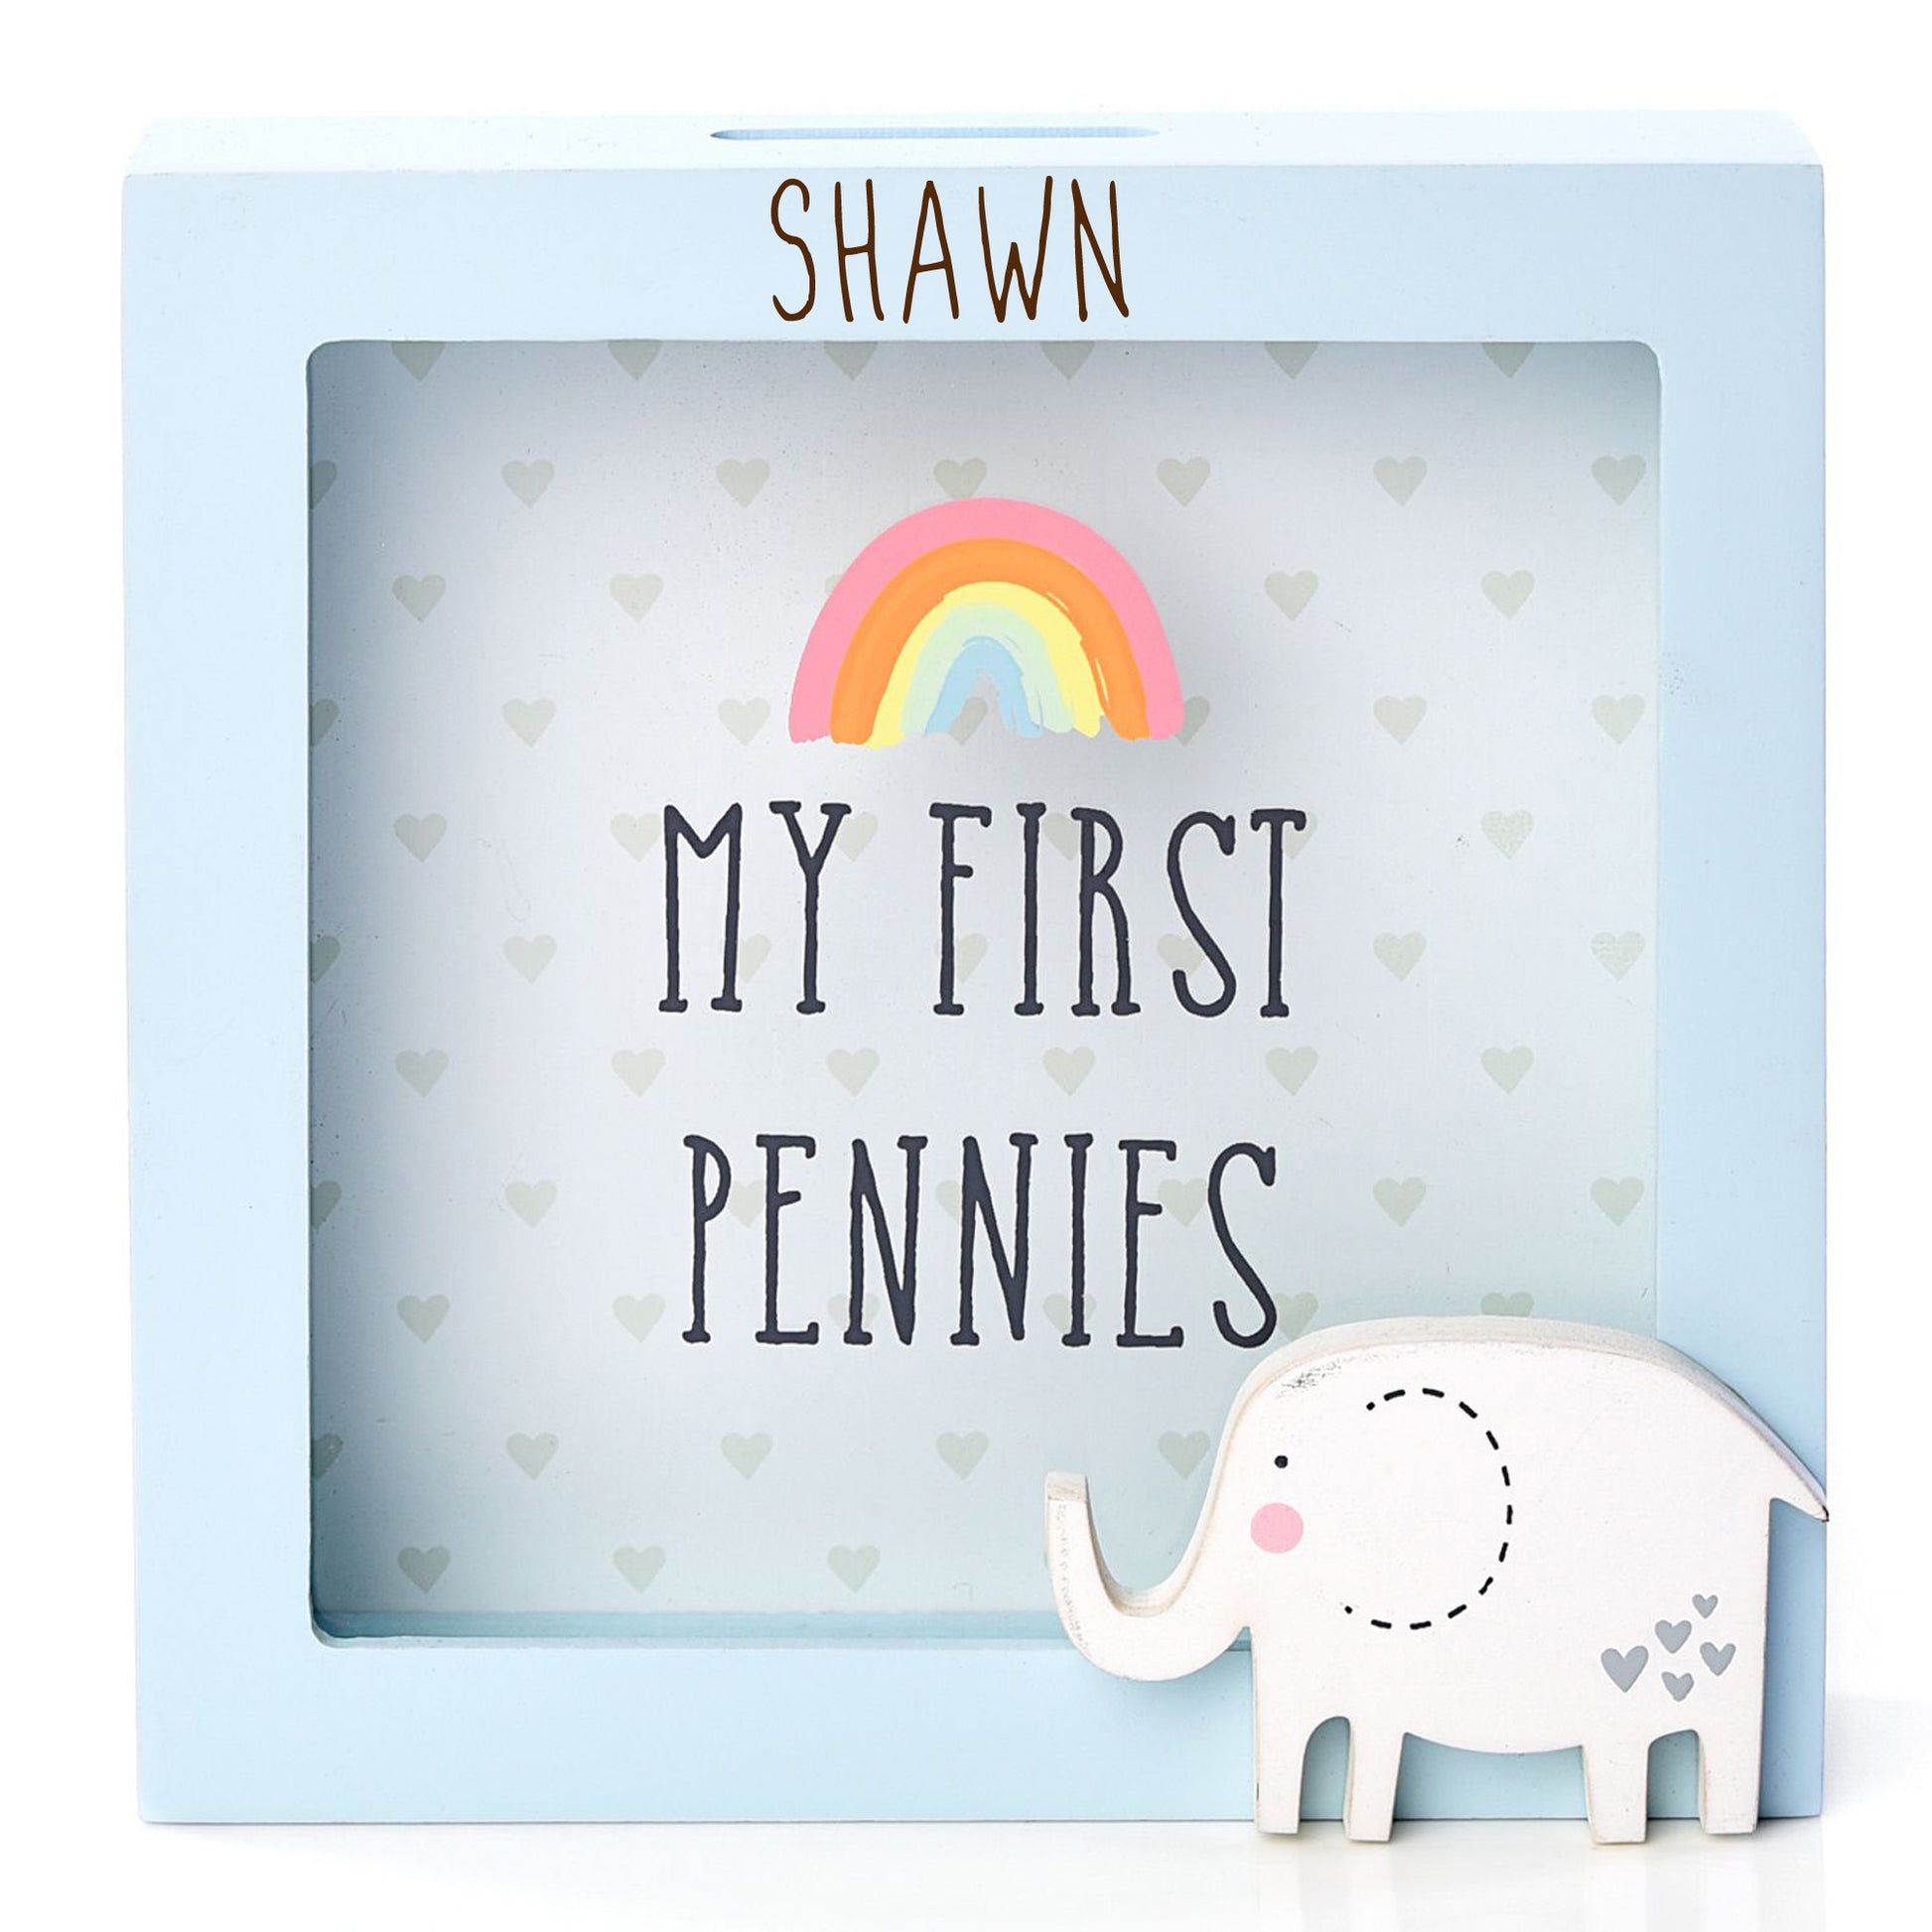 Personalised Engraved Blue Money Box Frame Piggy Bank New Baby Boy Gift  - Always Looking Good -   